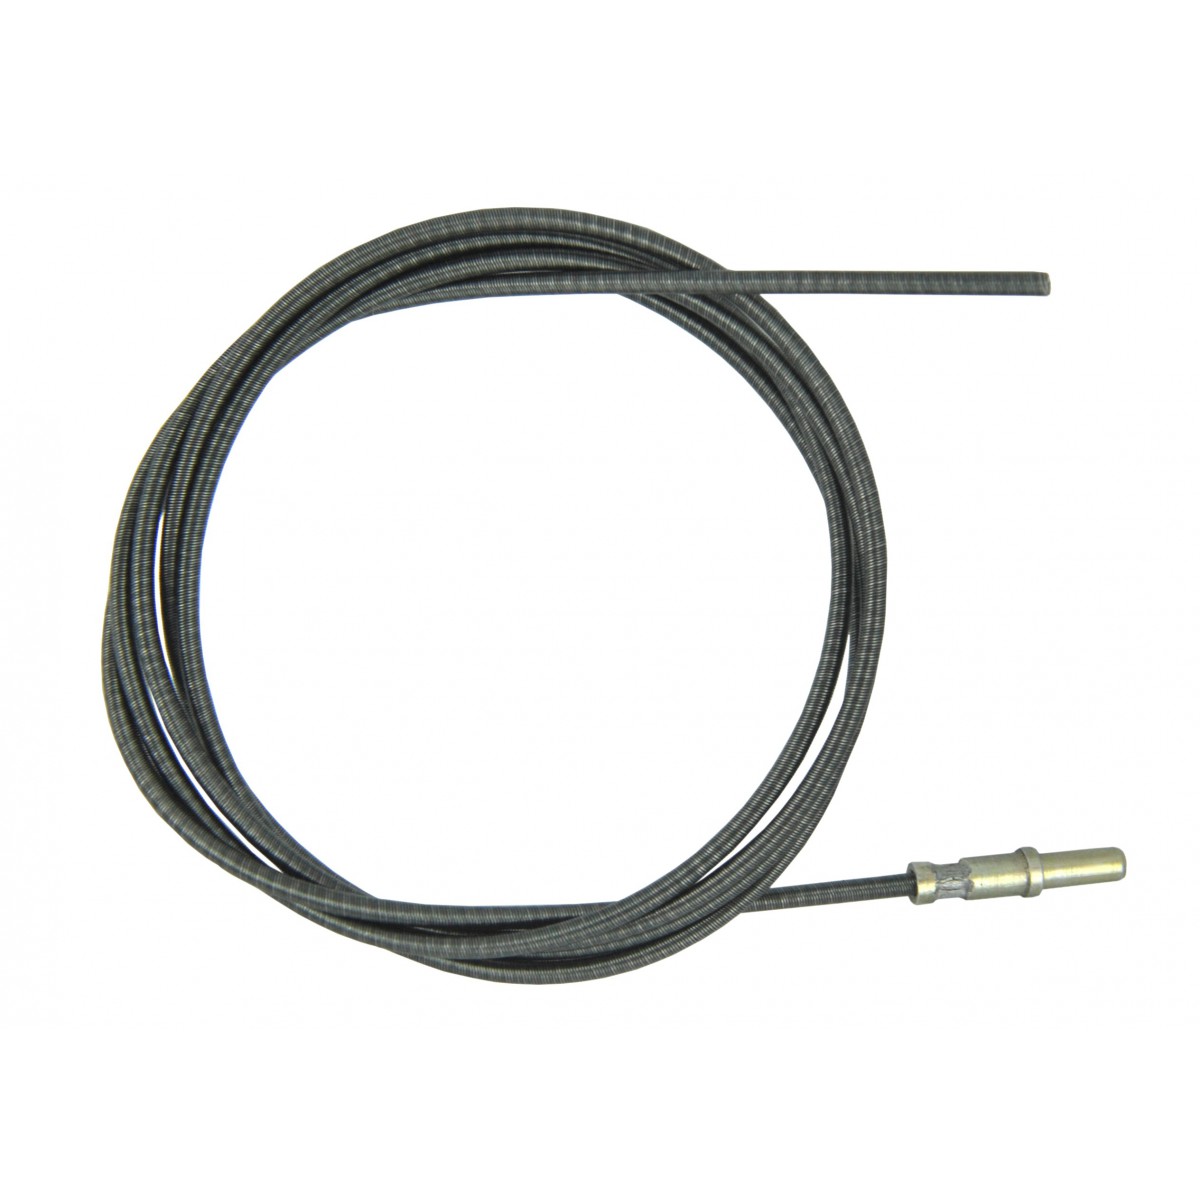 1500 mm tachometer cable Iseki tachometer without armor, cable insert